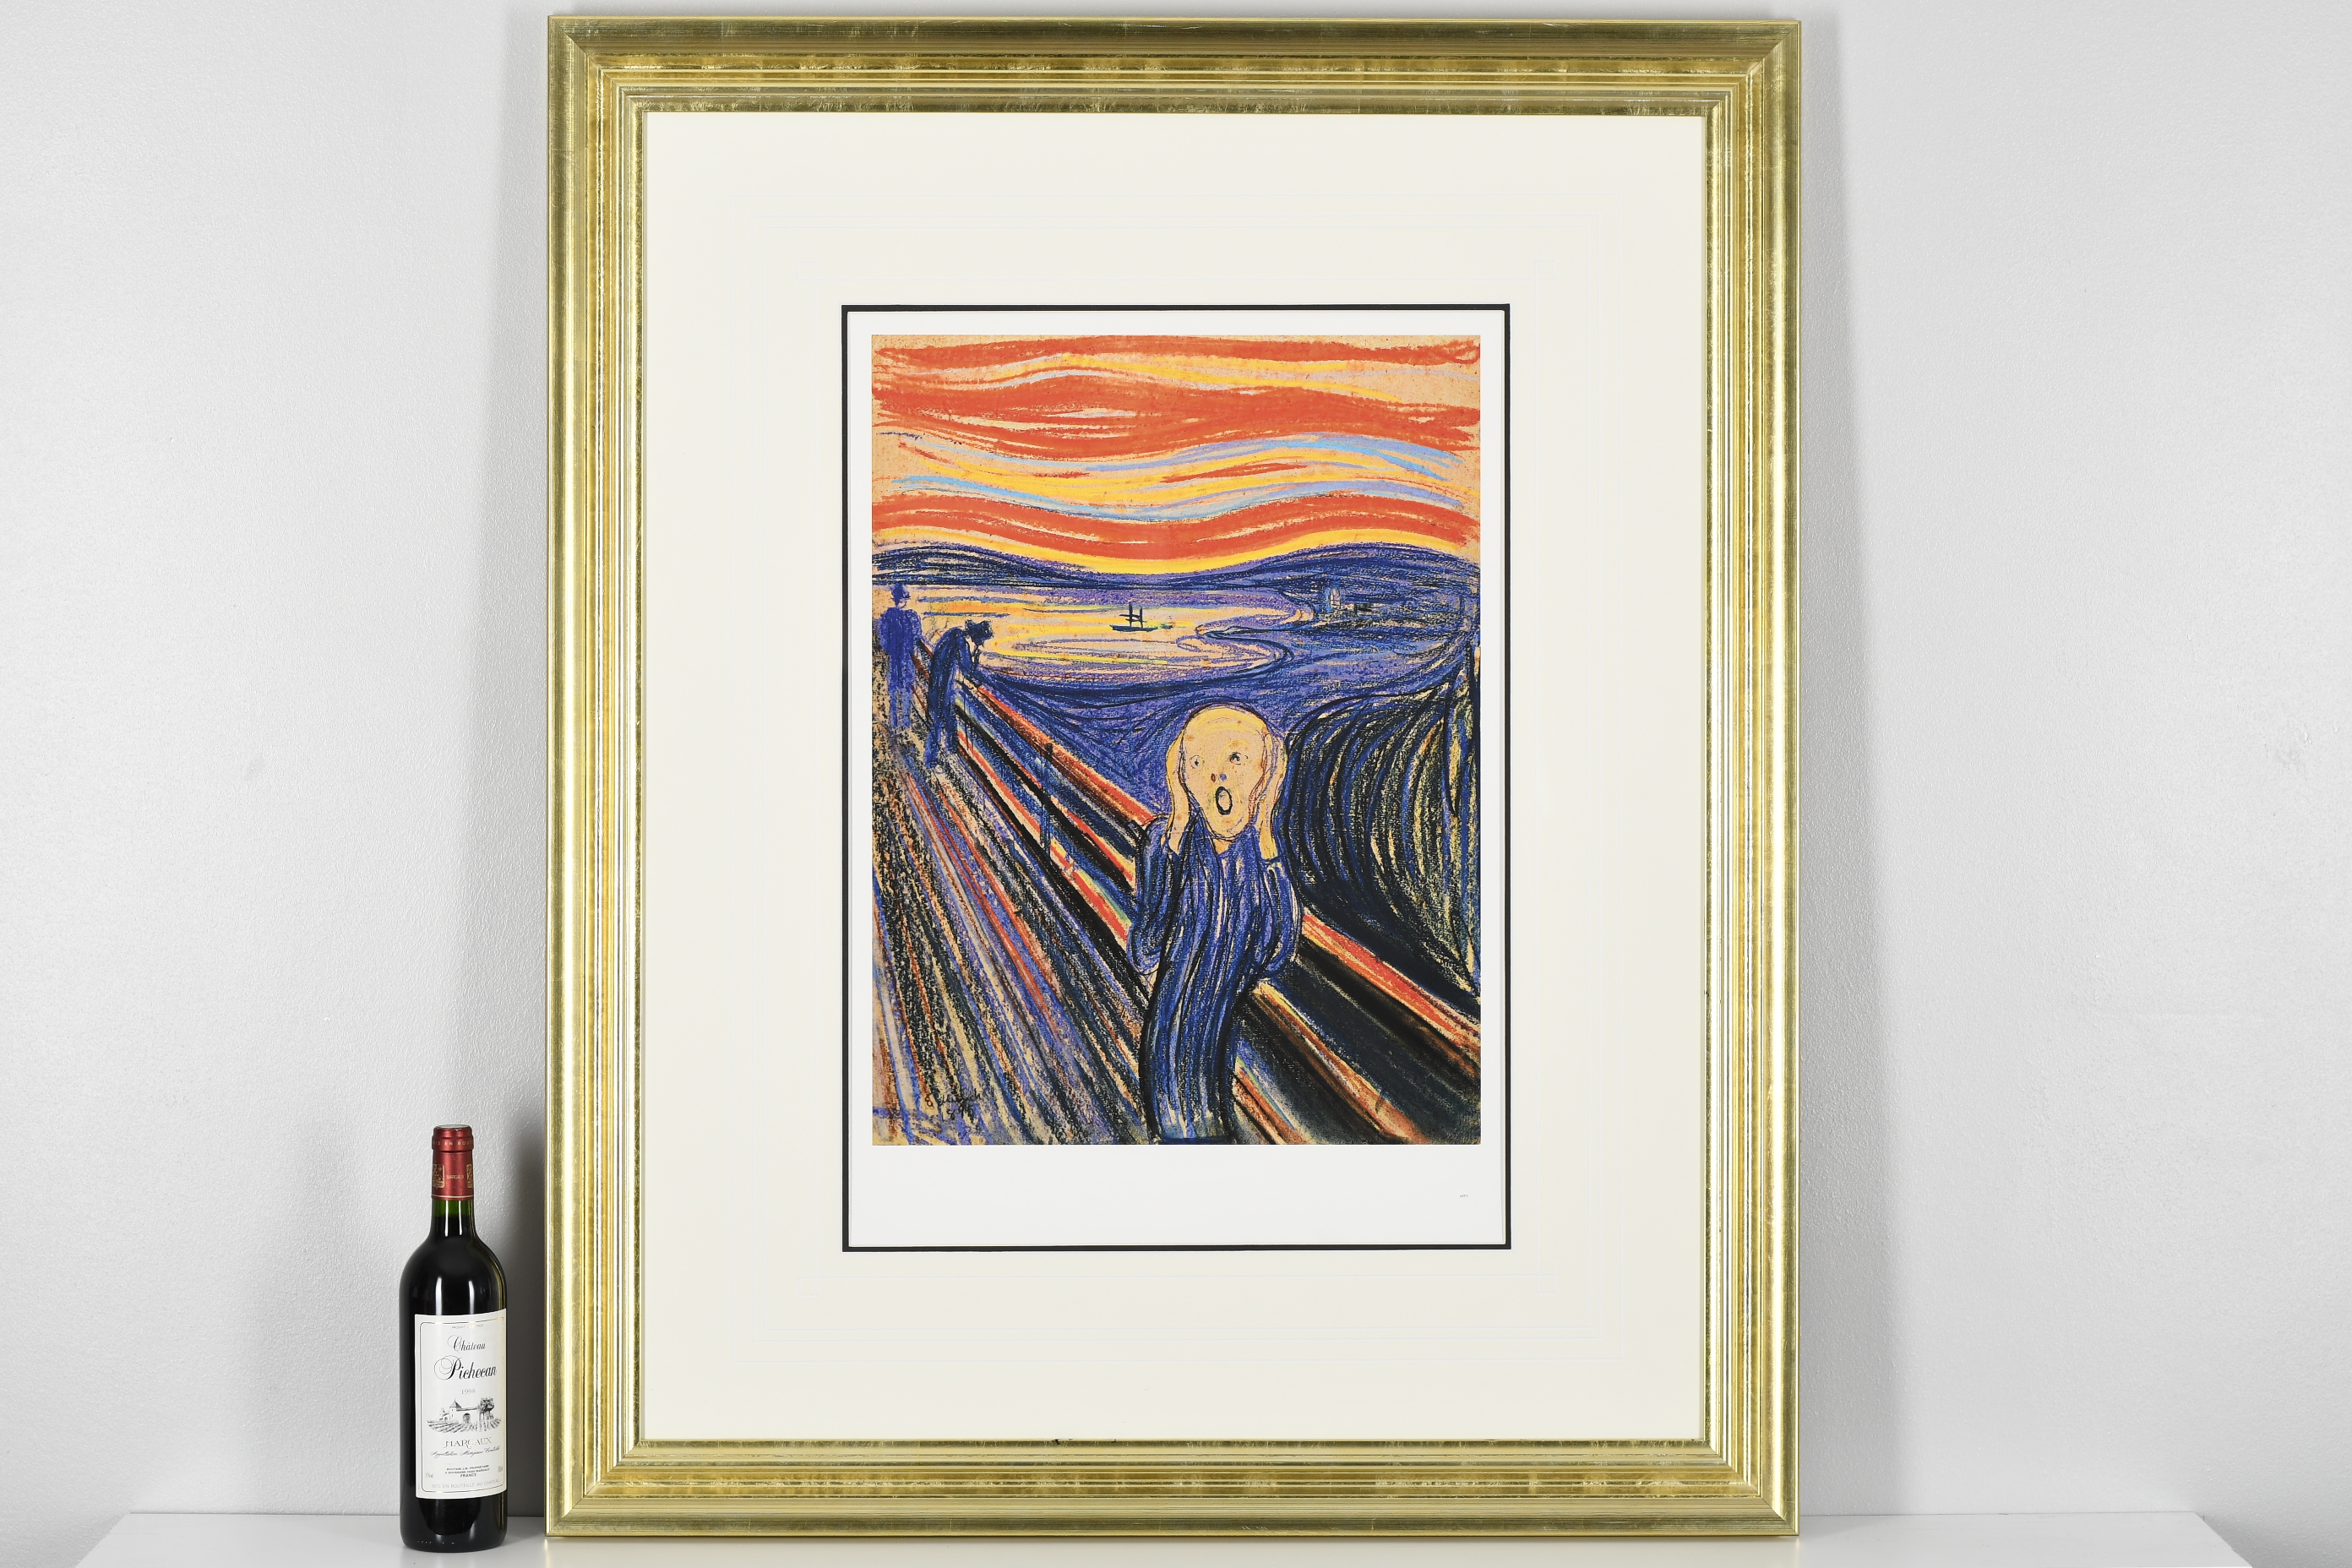 The Scream" by Edvard Munch. Limited Edition